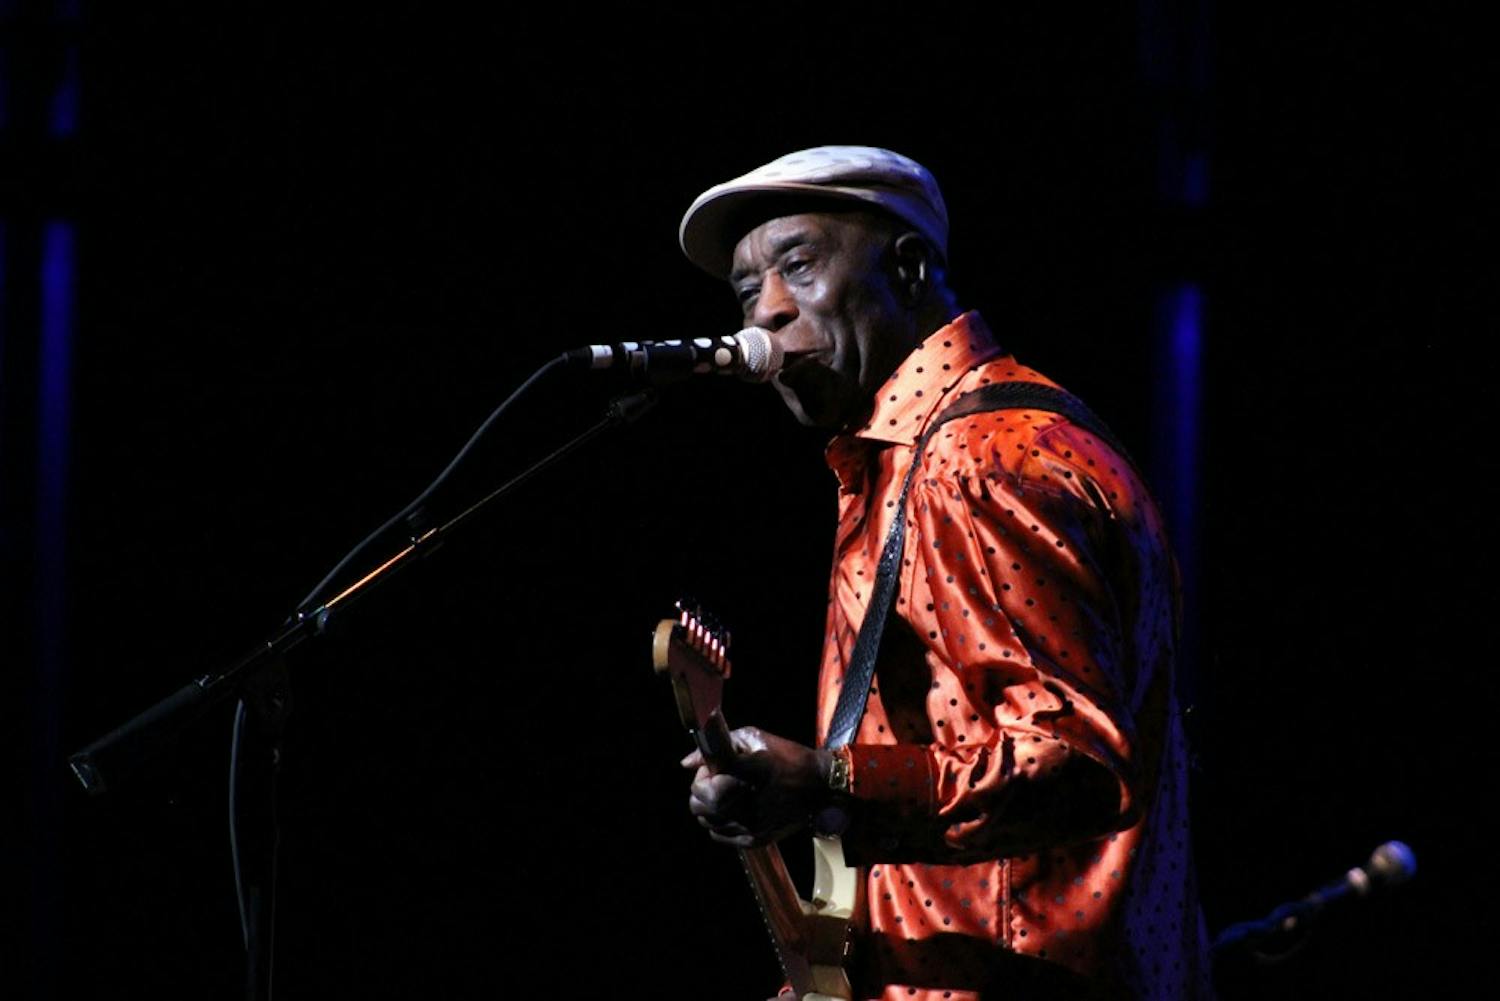 Buddy Guy, one of the last great blues men, rocked the CFA with his guitar on Friday night.